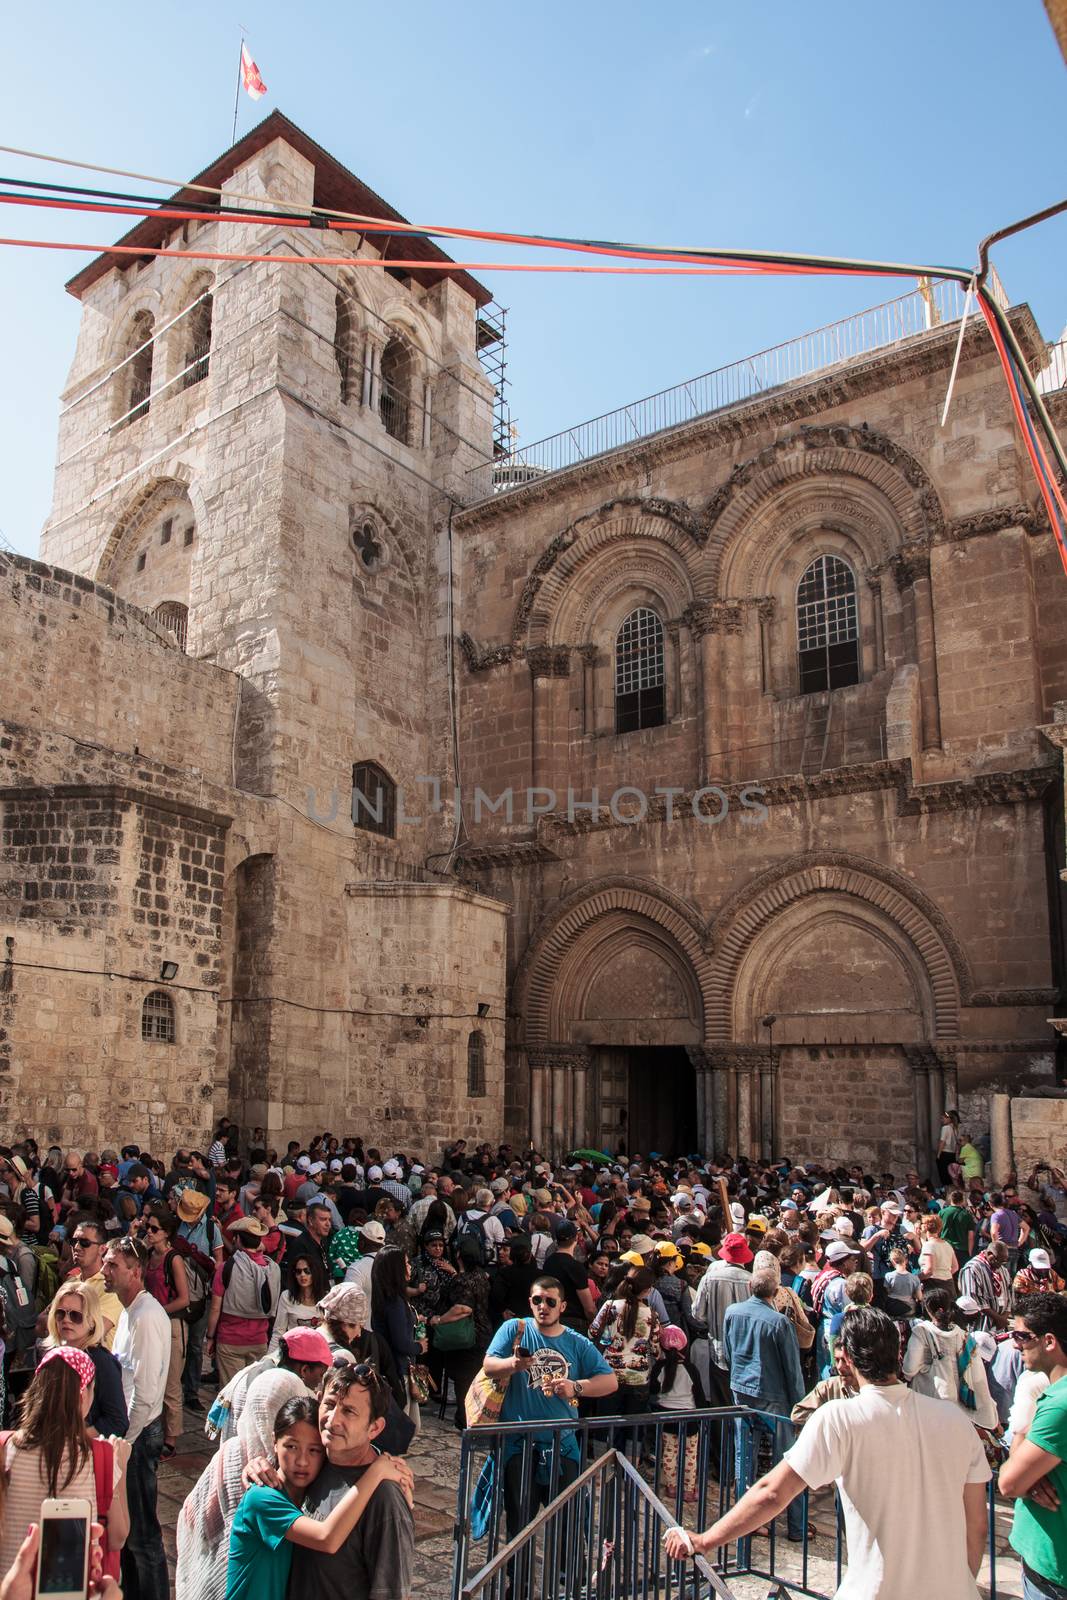 JERUSALEM - APRIL 18, 2014: A crowd of pilgrims fills the front yard of the Church of the Holy Sepulcher, on Good Friday, in the old city of Jerusalem, Israel